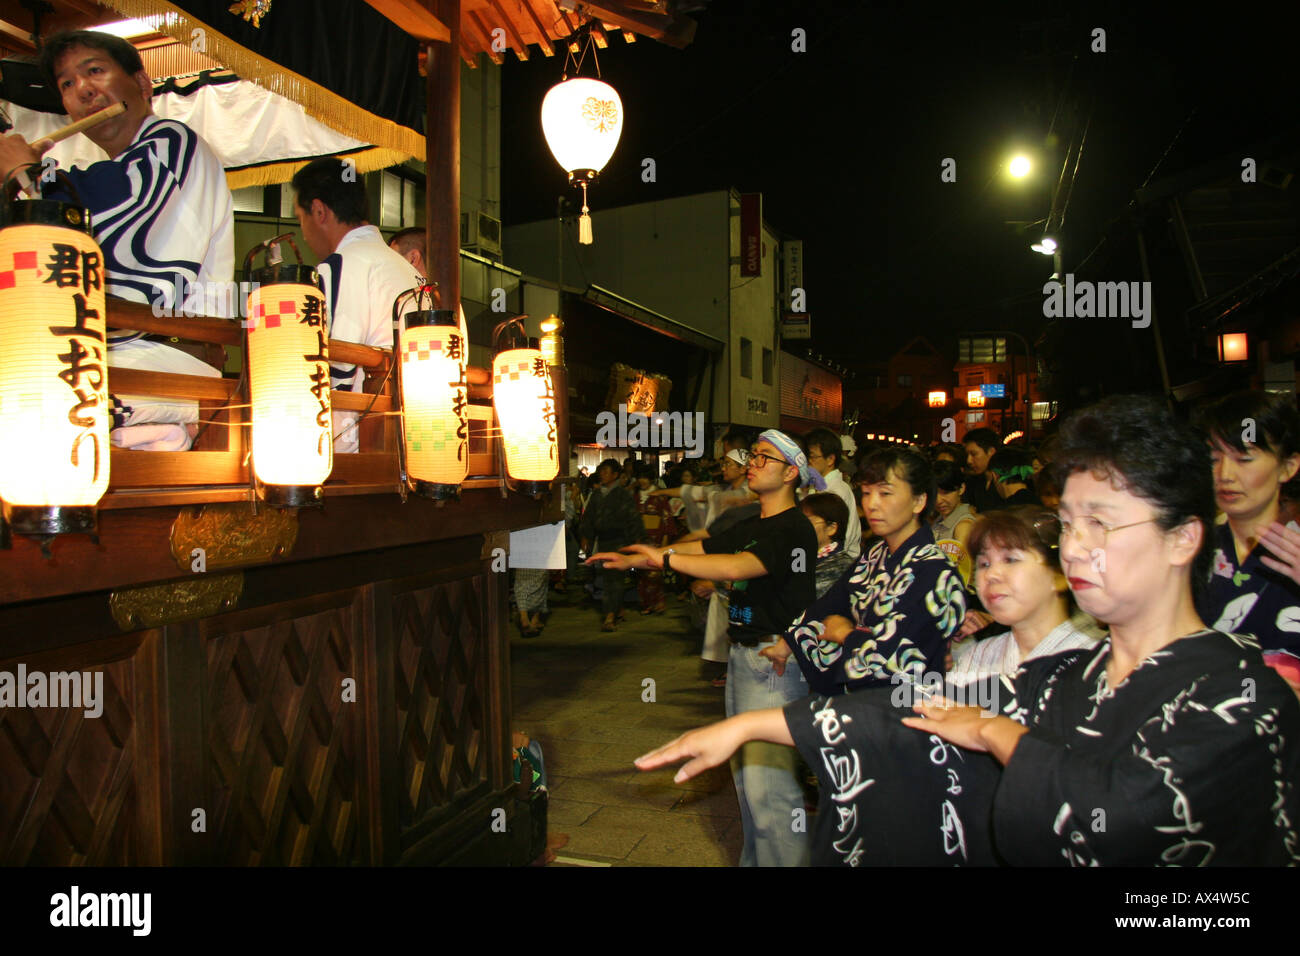 People in yukata dancing at an o-bon festival for the dead in Japan Stock Photo